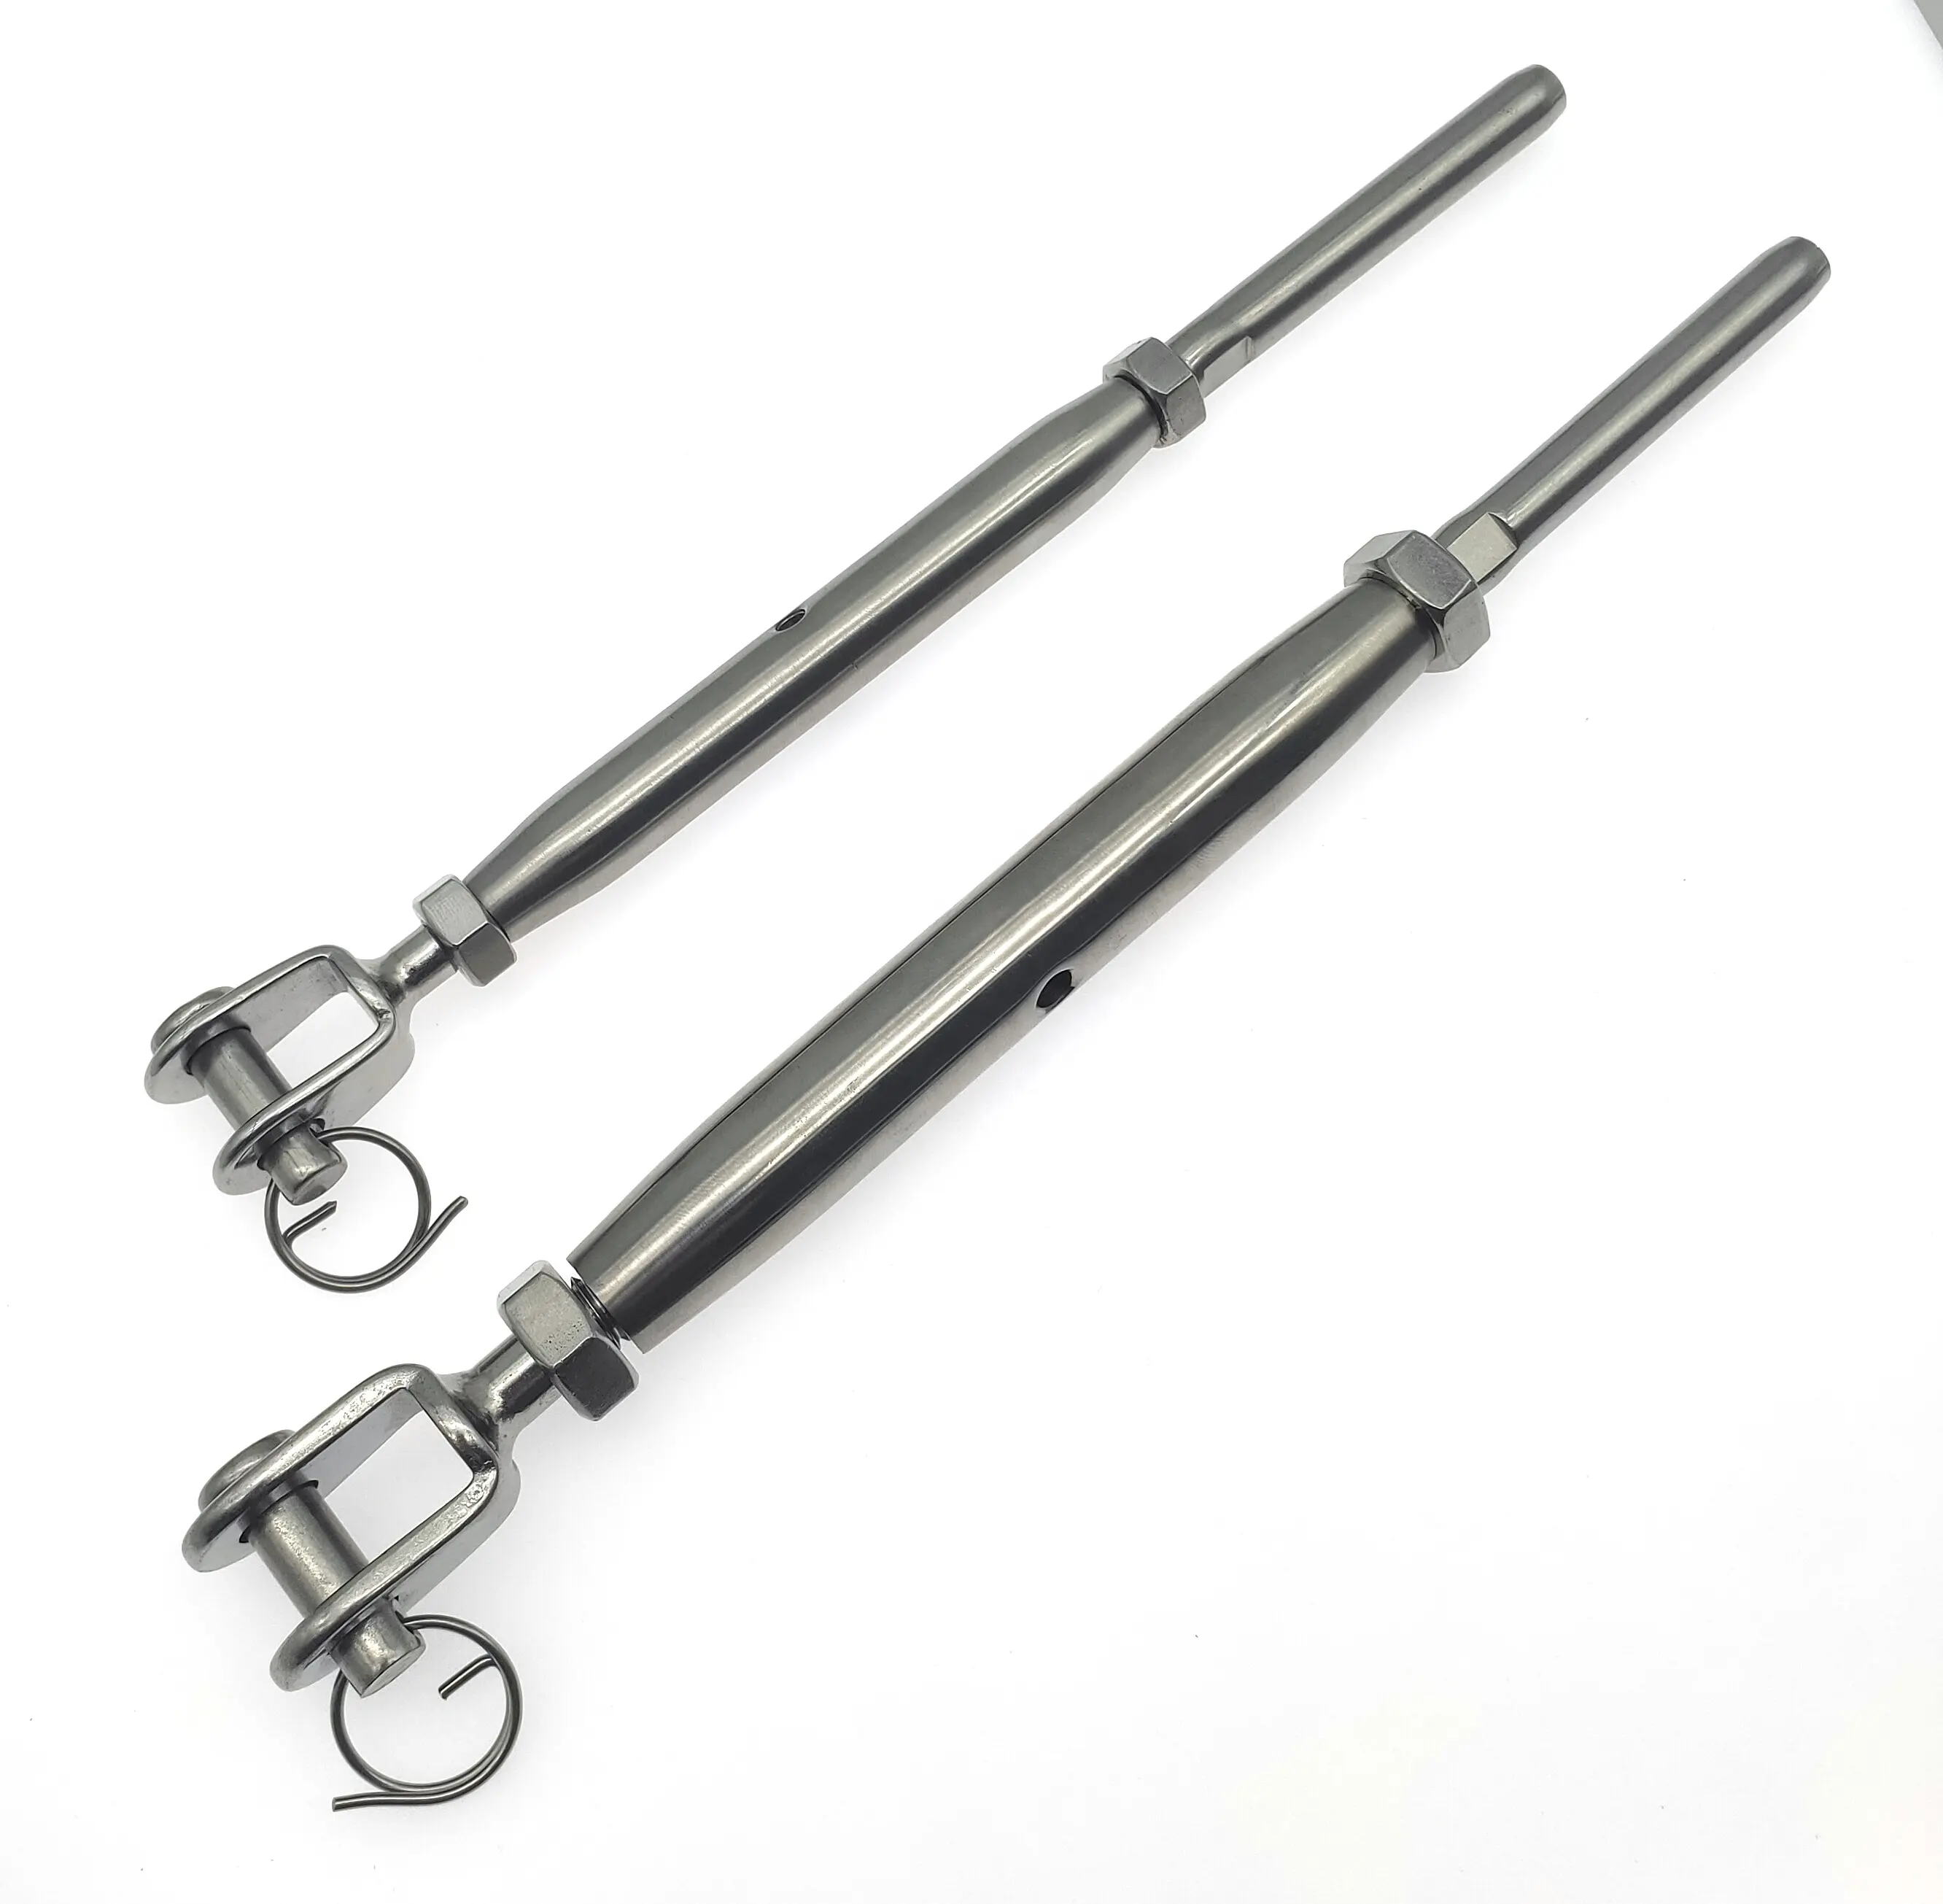 Stainless steel Rigging Screw Fork and Swage Stud , Turnbuckle for marine, industrial and architectural applications